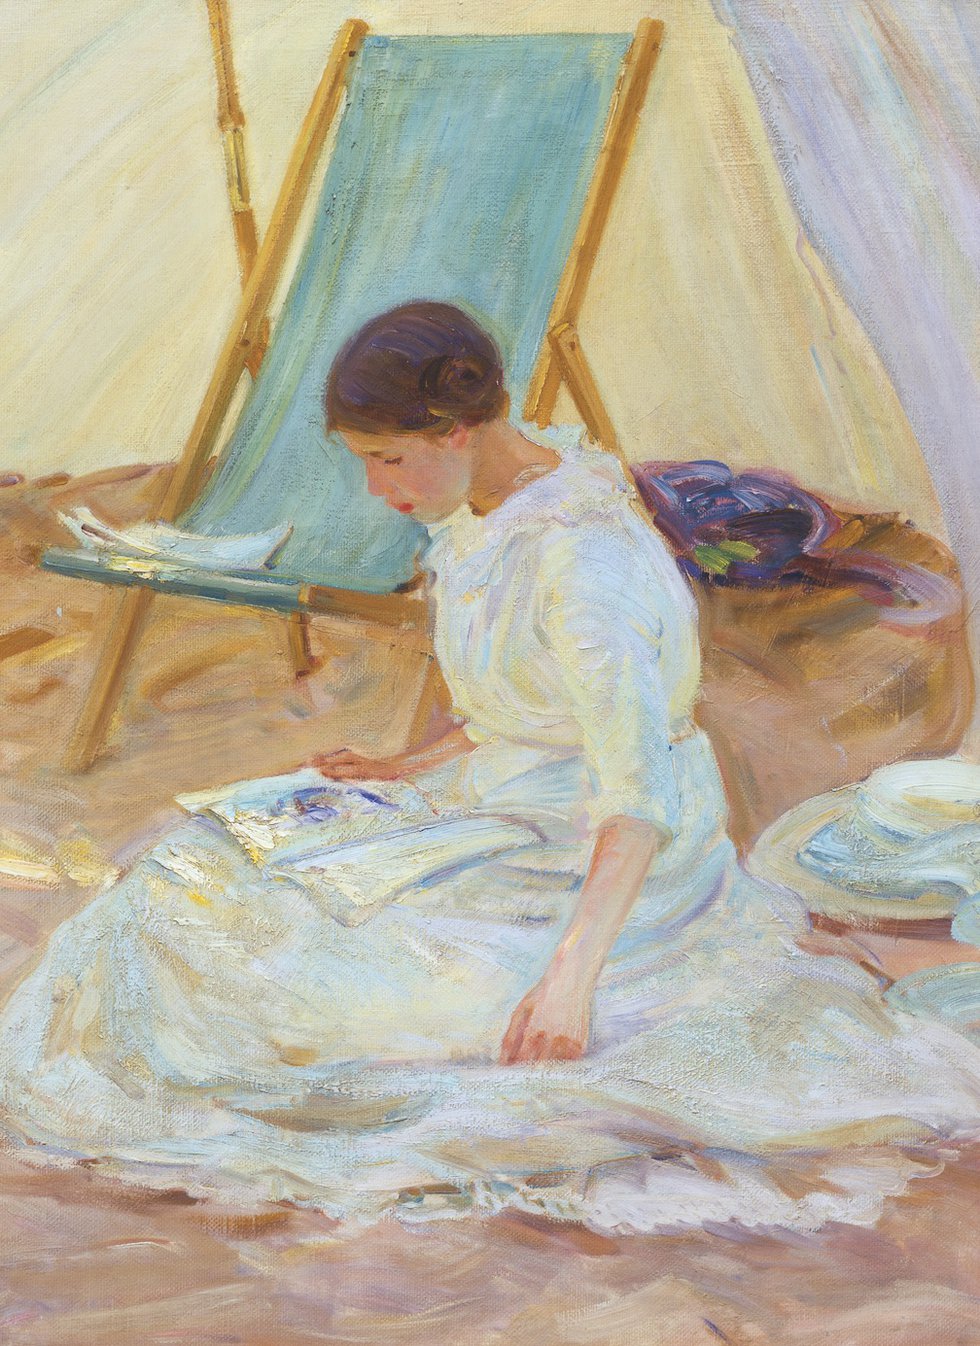 Helen McNicoll, "In the Tent (detail)," 1914